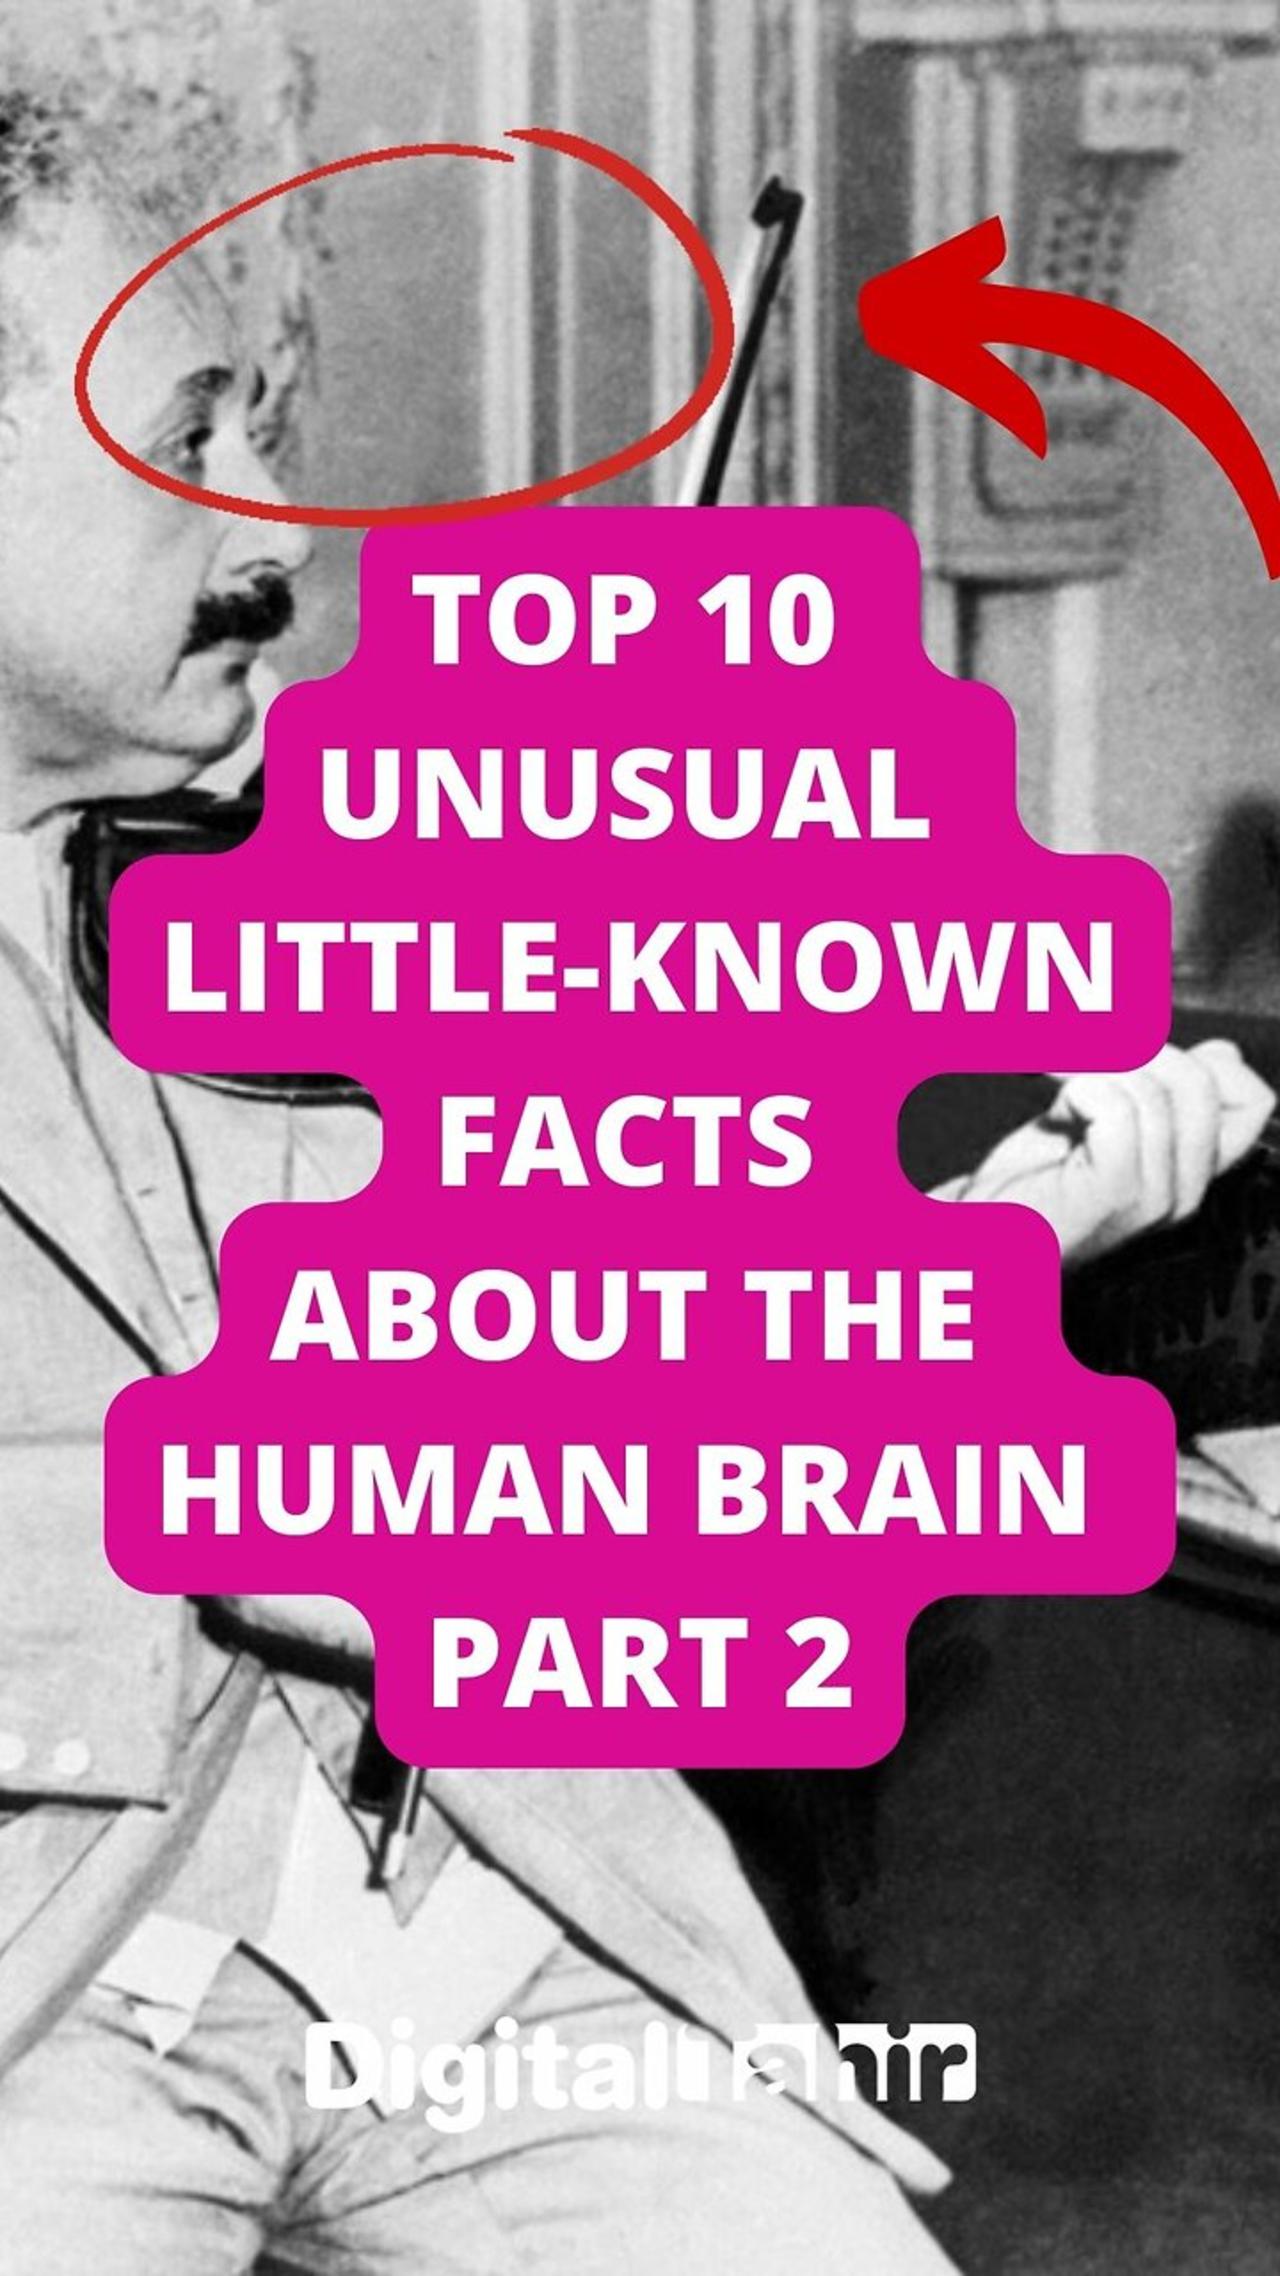 Top 10 Unusual Little-known Facts About the Human Brain Part 2